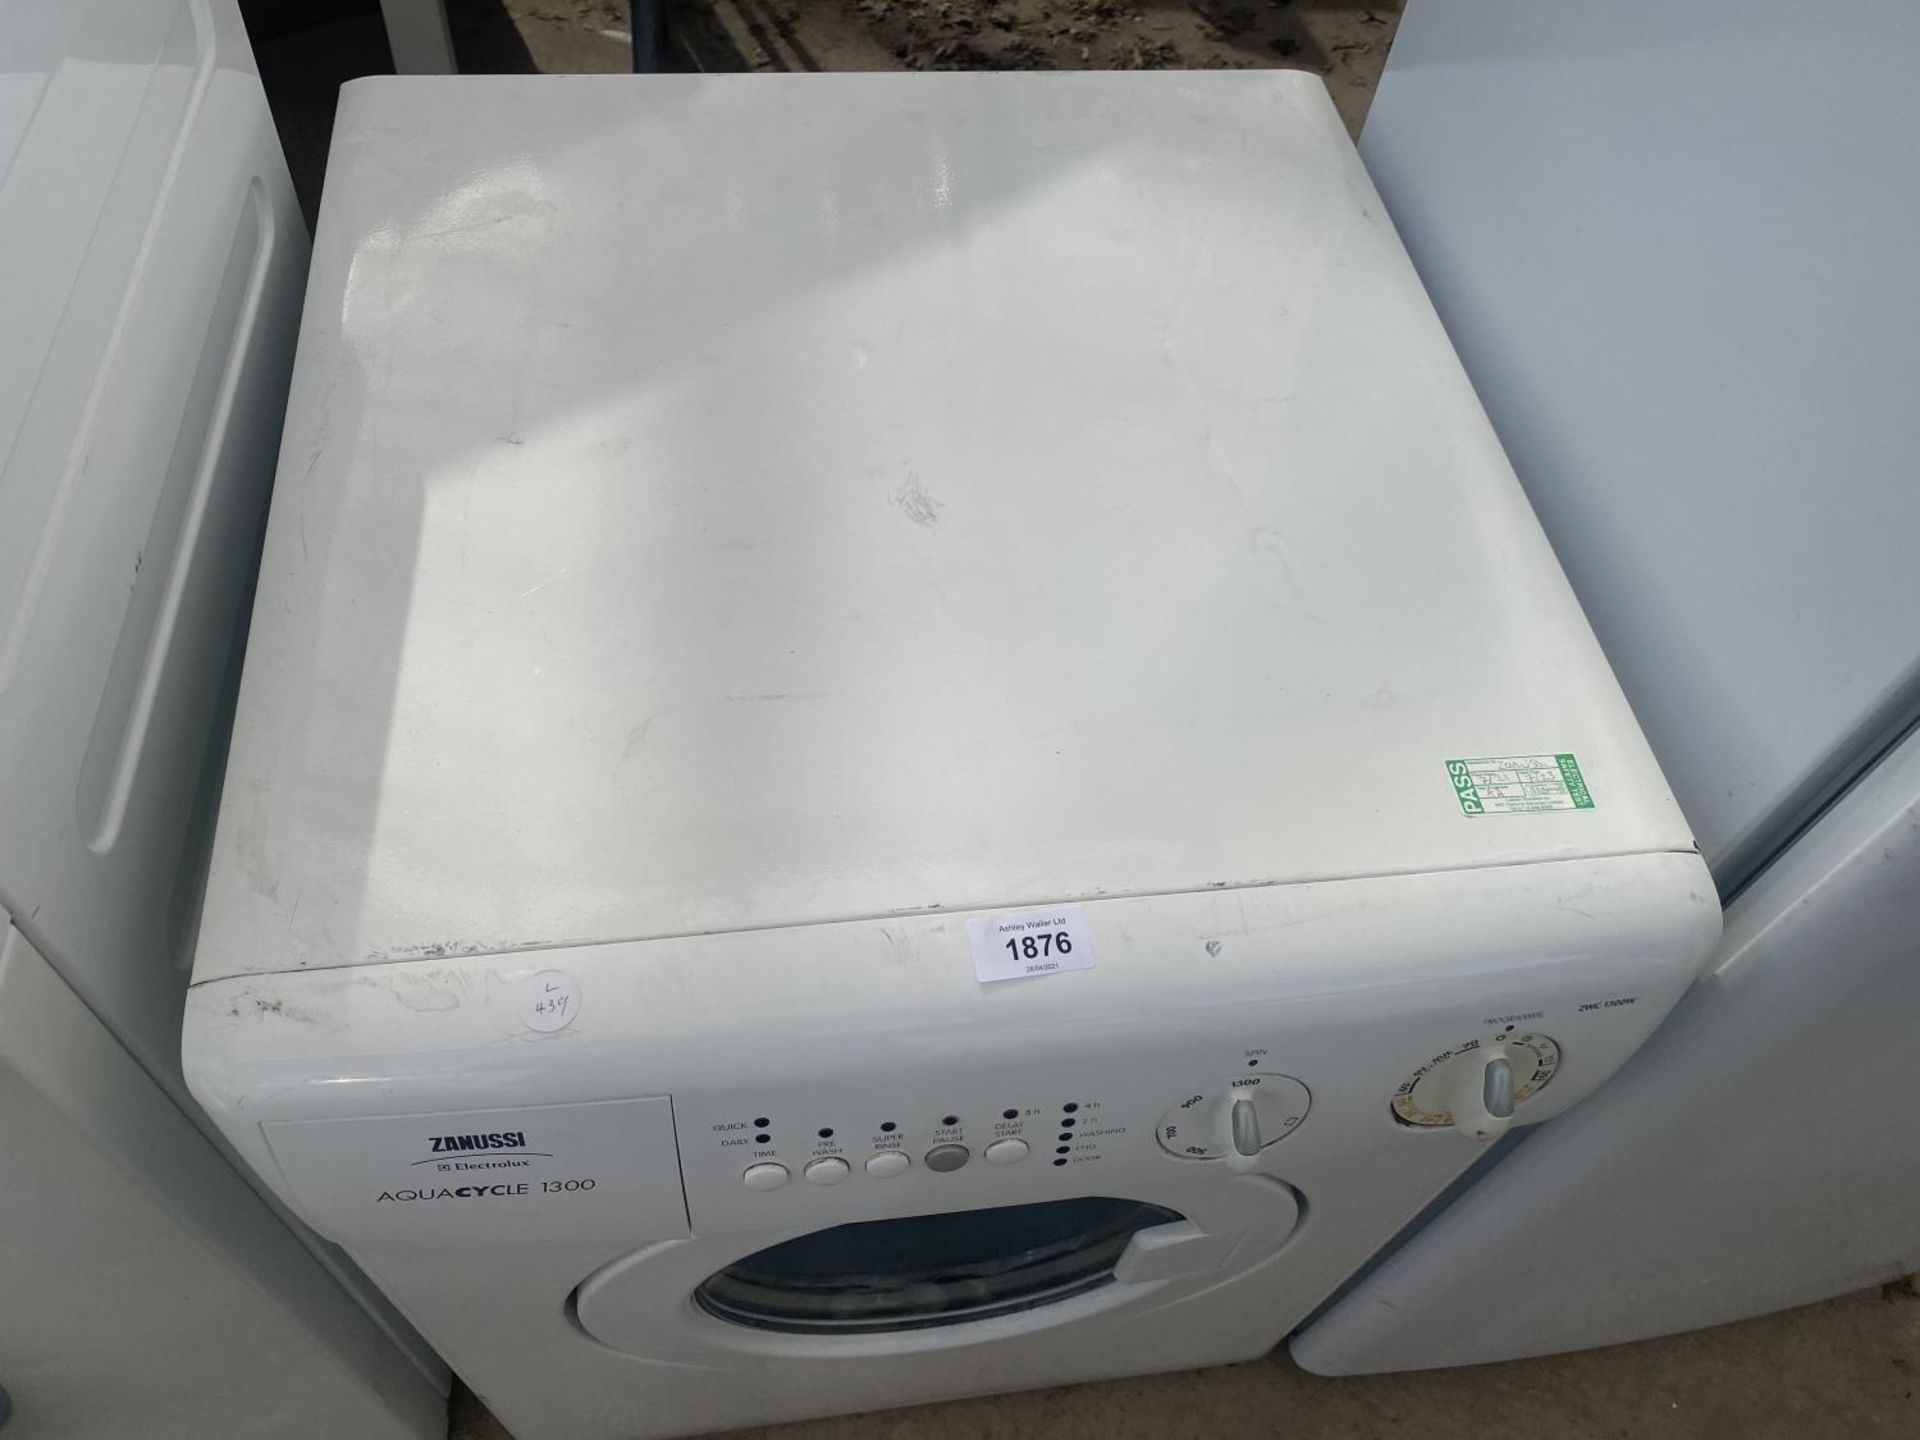 A WHITE ZANUSSI 3KG COMPACT WASHING MACHINE, PAT TEST, FUNCTION TEST AND SANITIZED BUT NO WARRANTY - Image 2 of 4